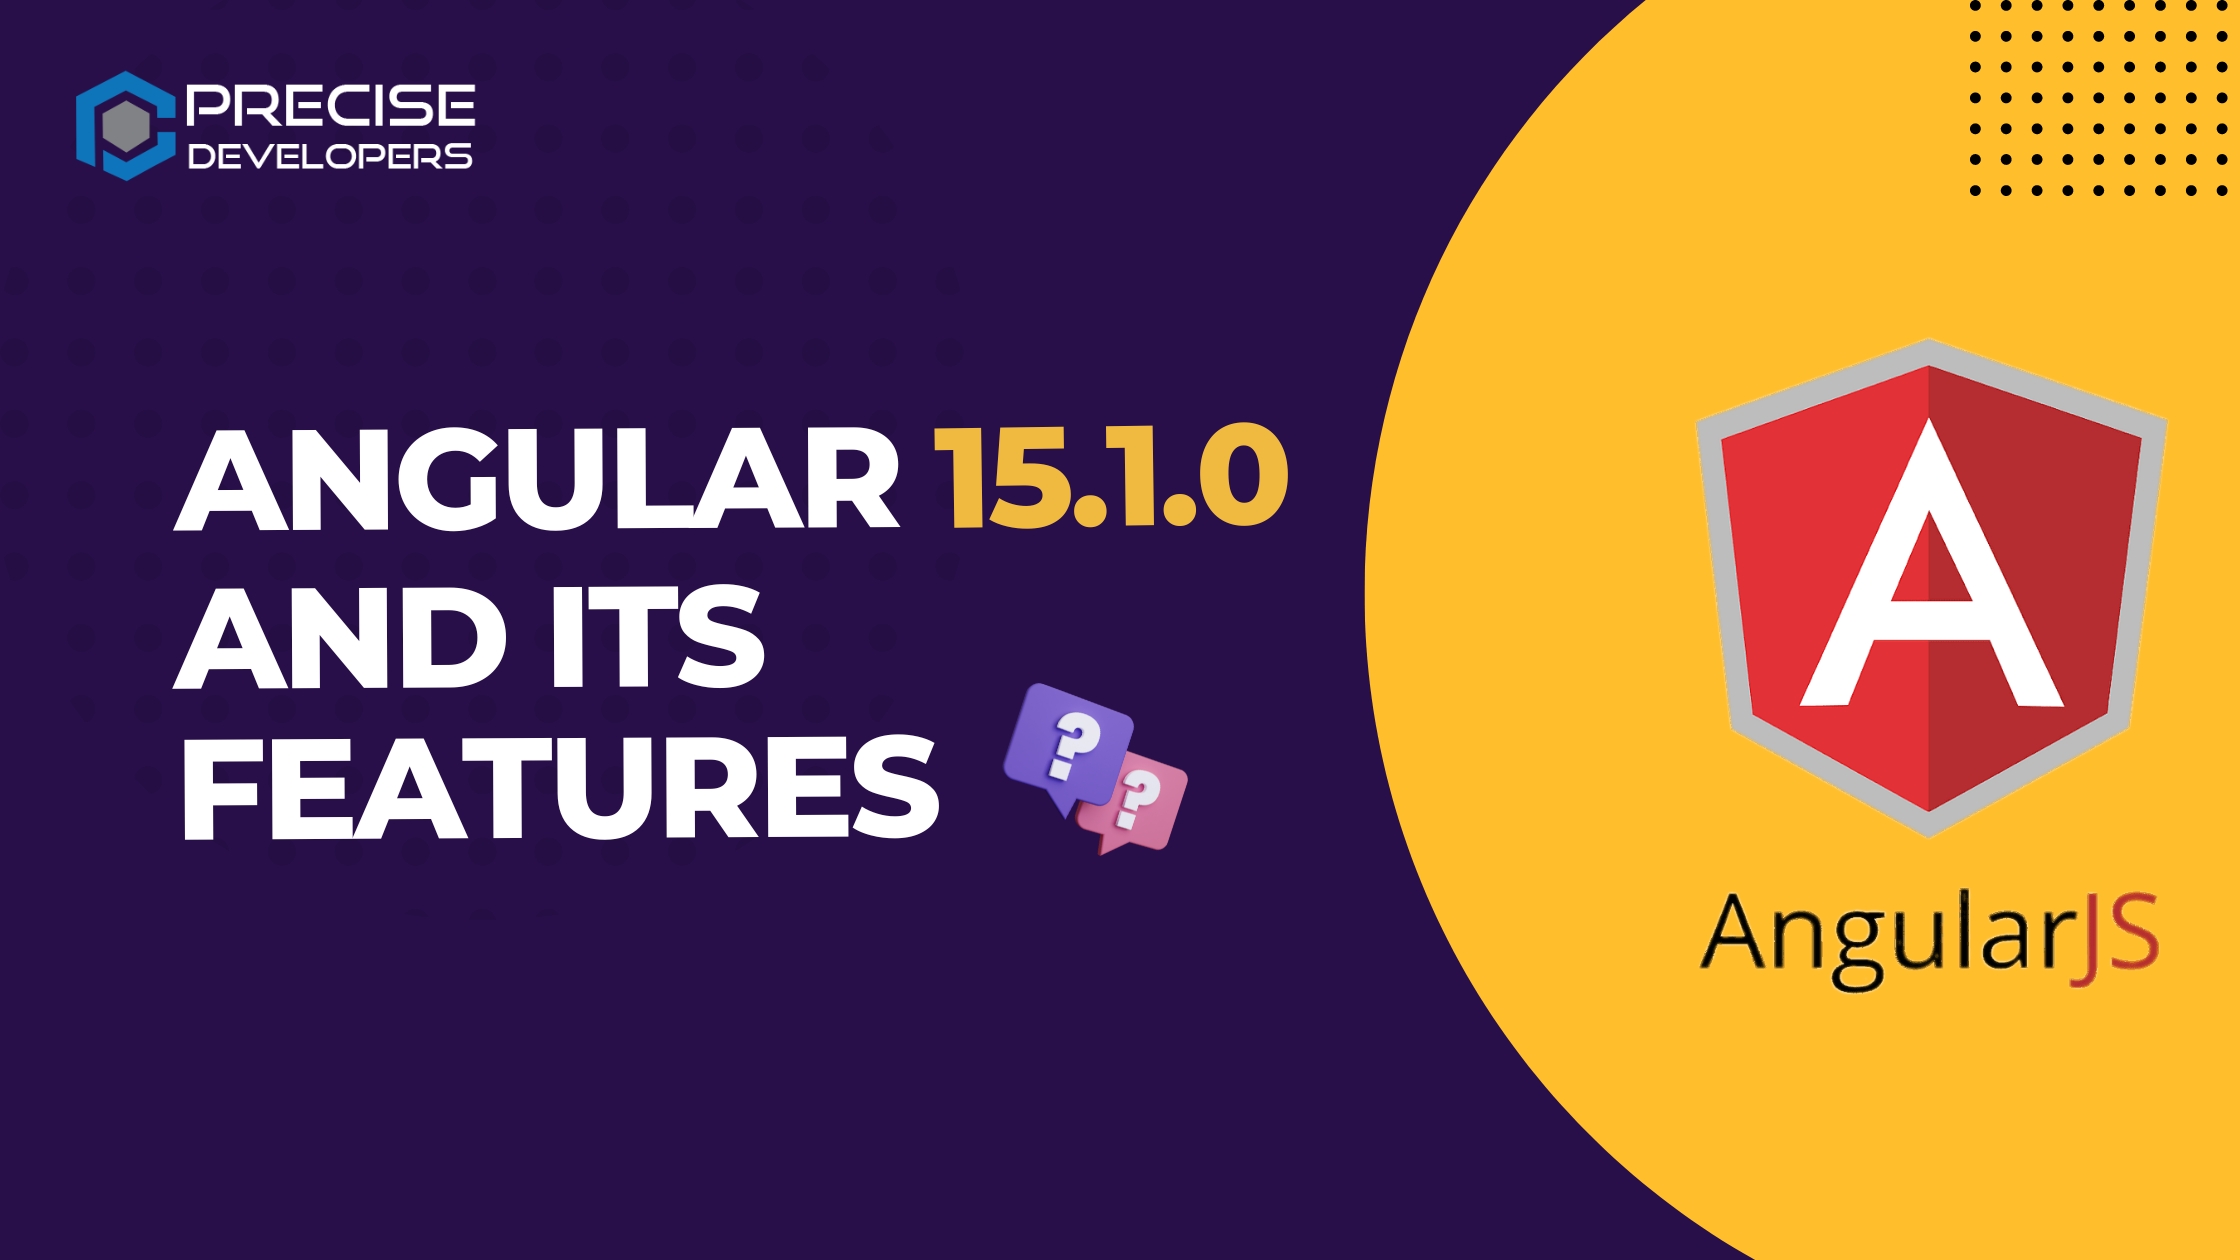 Angular 15.1.0 and its features Precise Developers